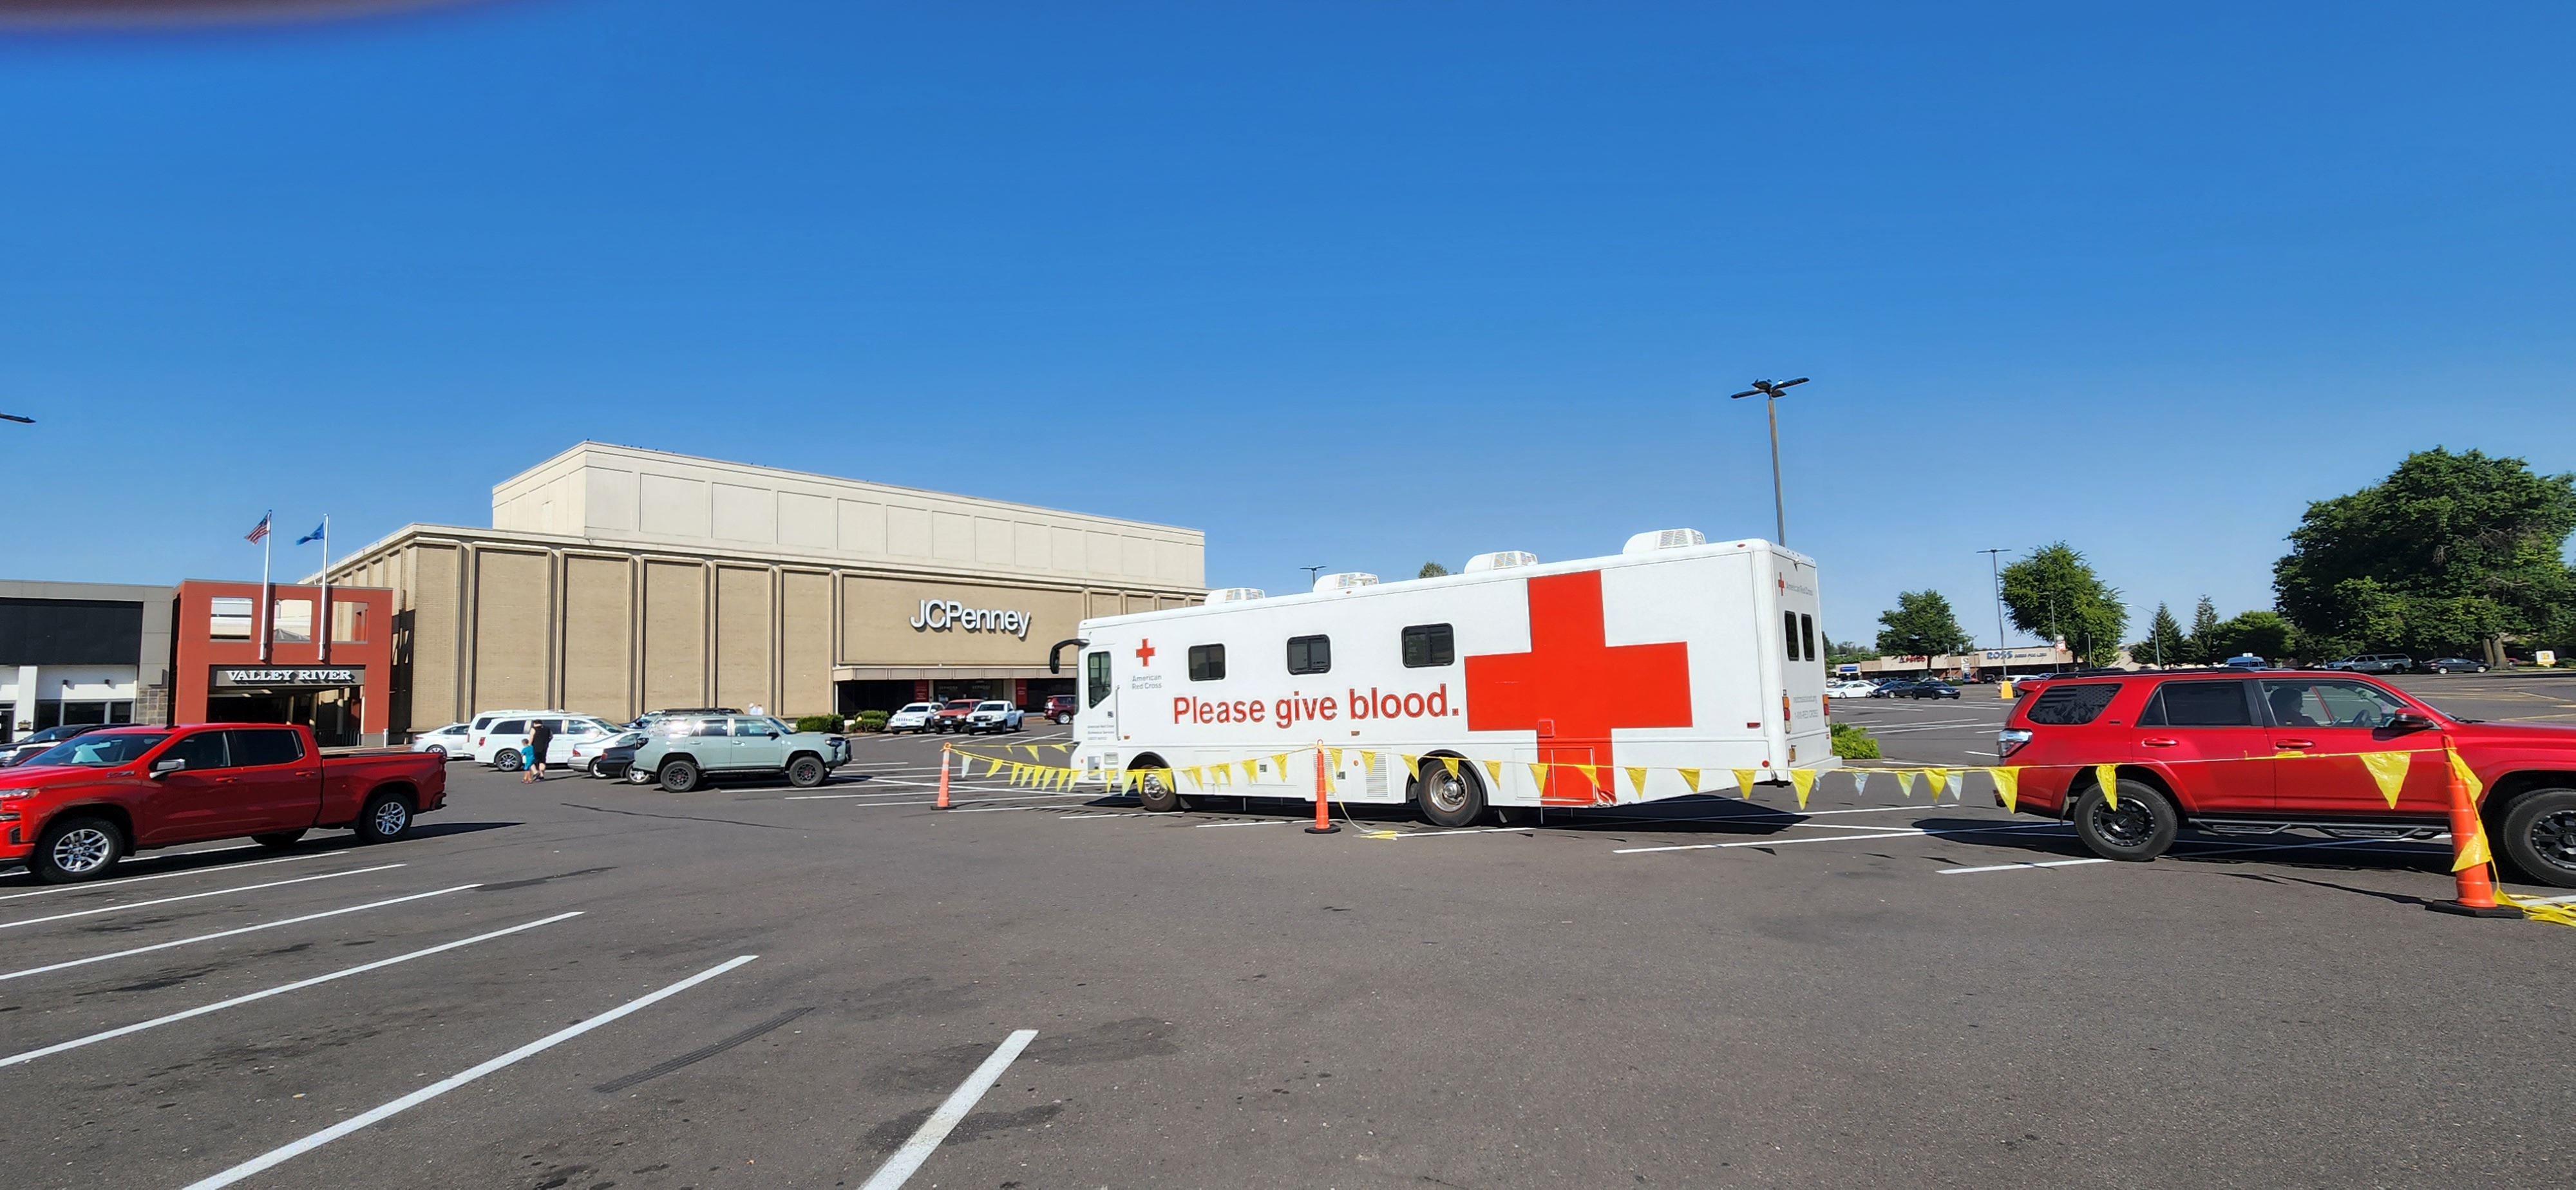 Red Cross Blood Mobile in a parking lot